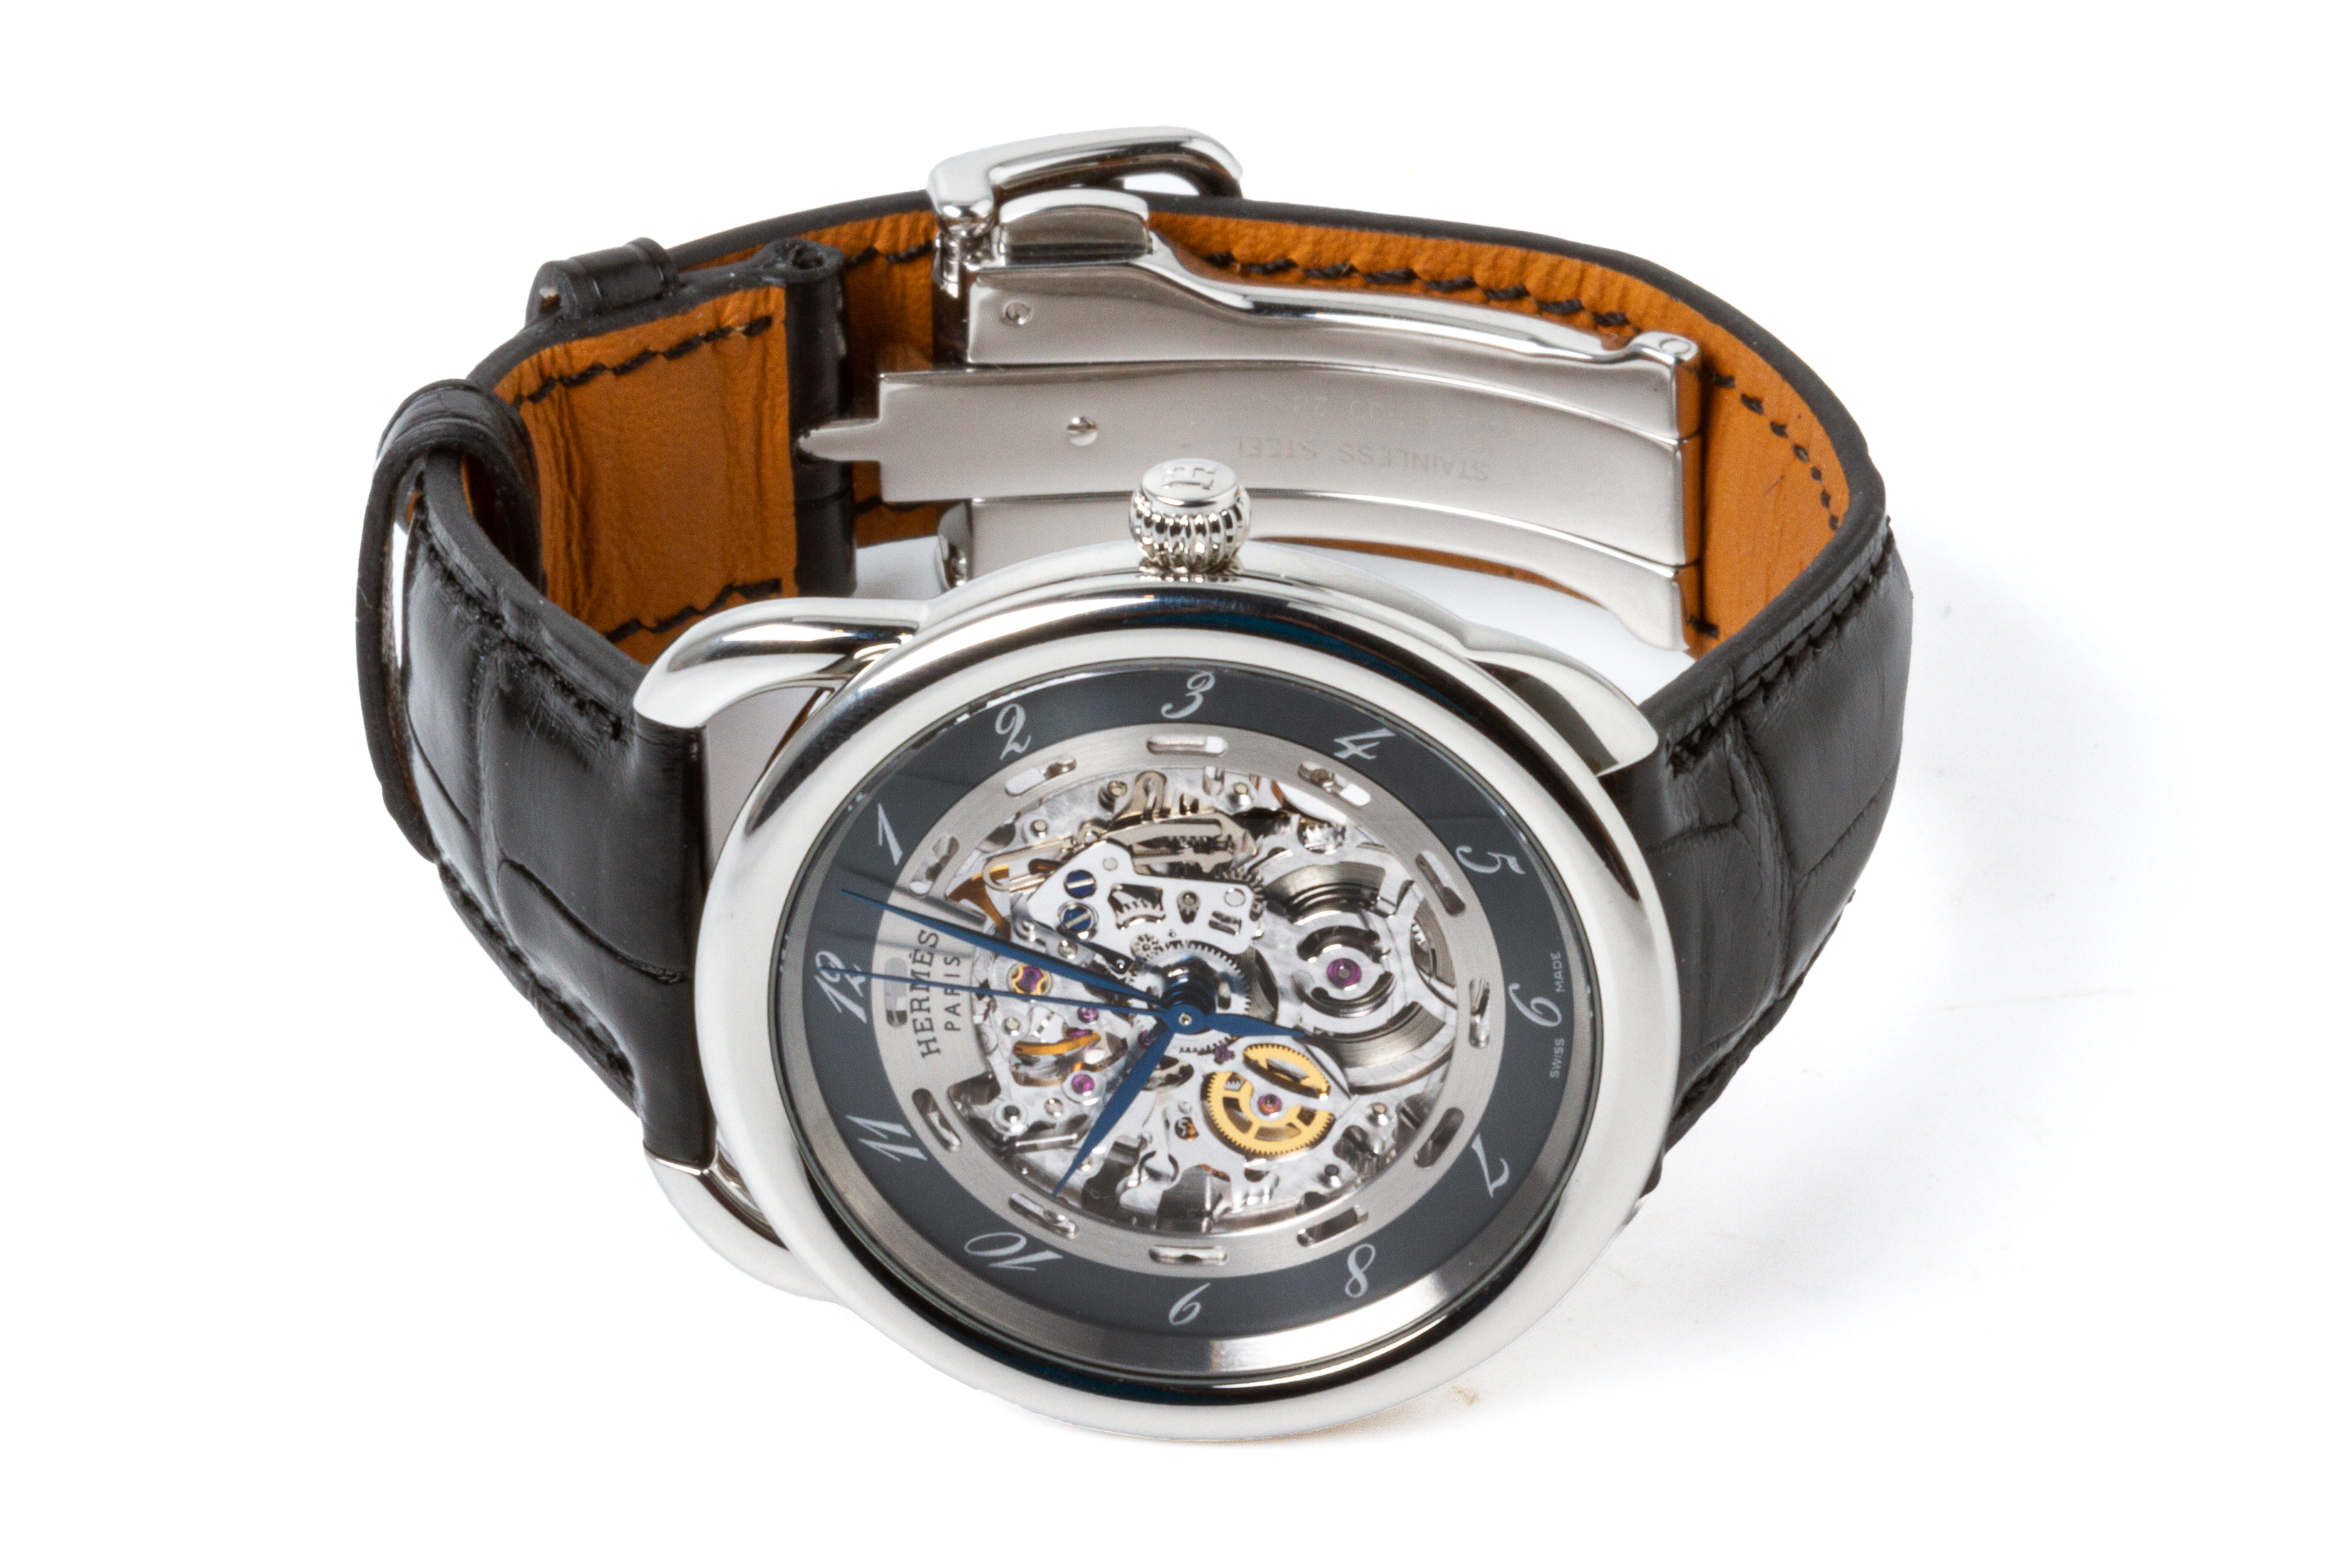 AN HERMES ARCEAU STAINLESS STEEL AUTOMATIC WRISTWATCH - Image 3 of 4